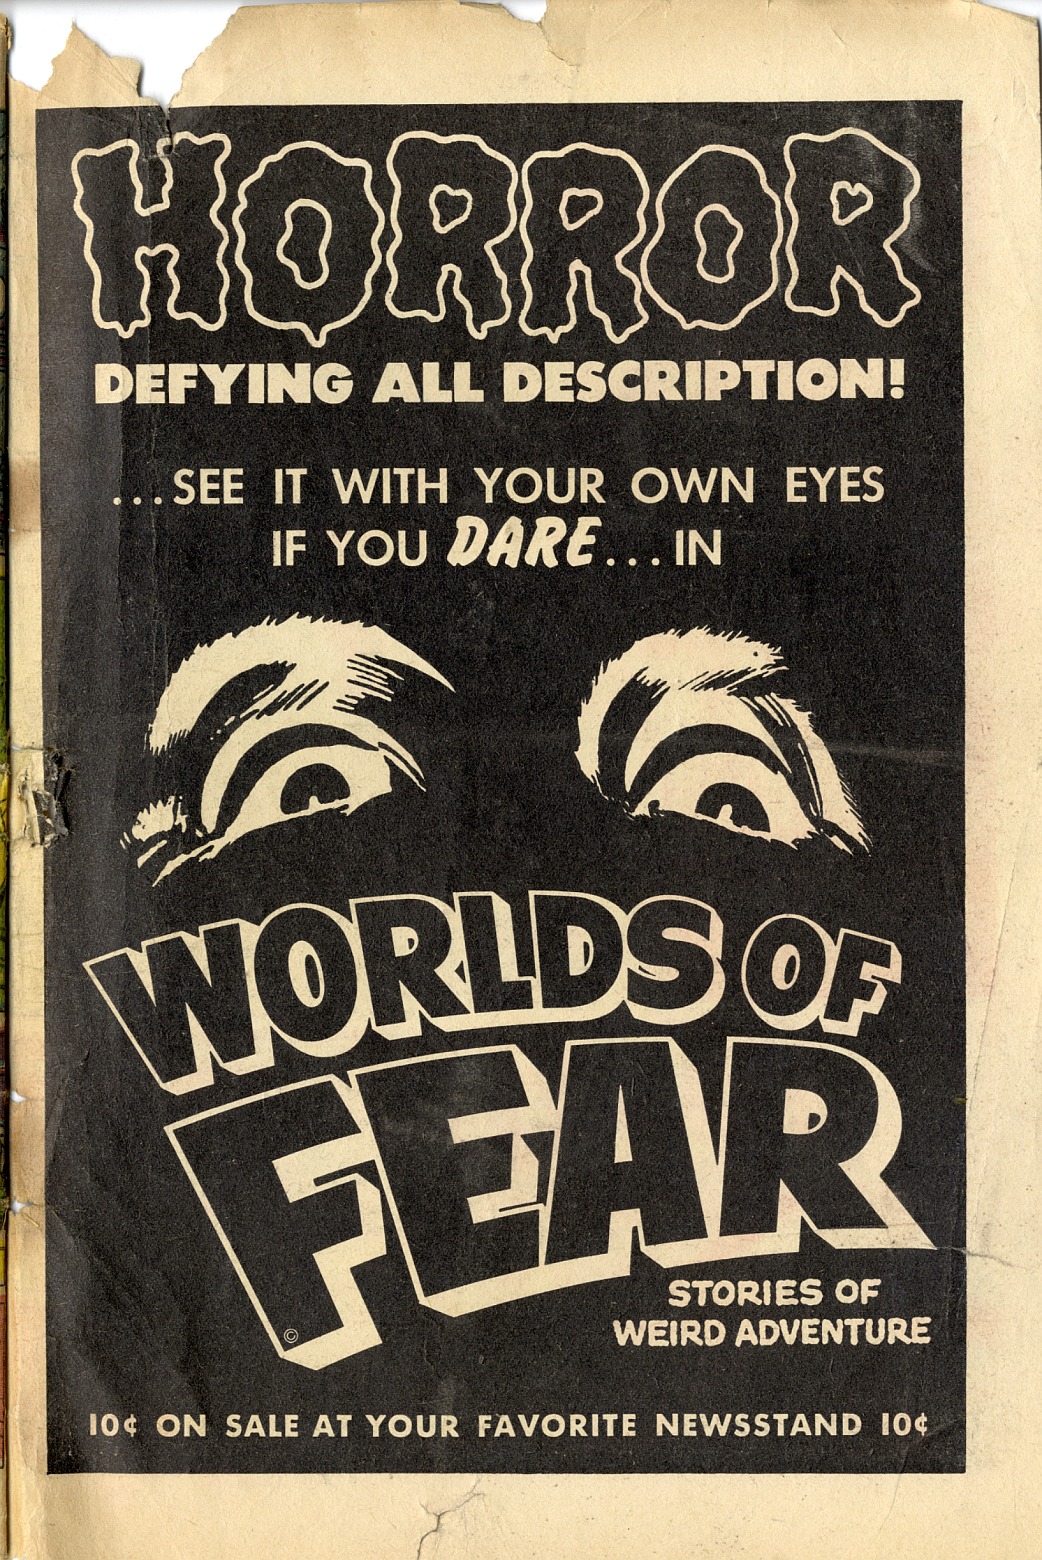 Read online Worlds of Fear comic -  Issue #8 - 35